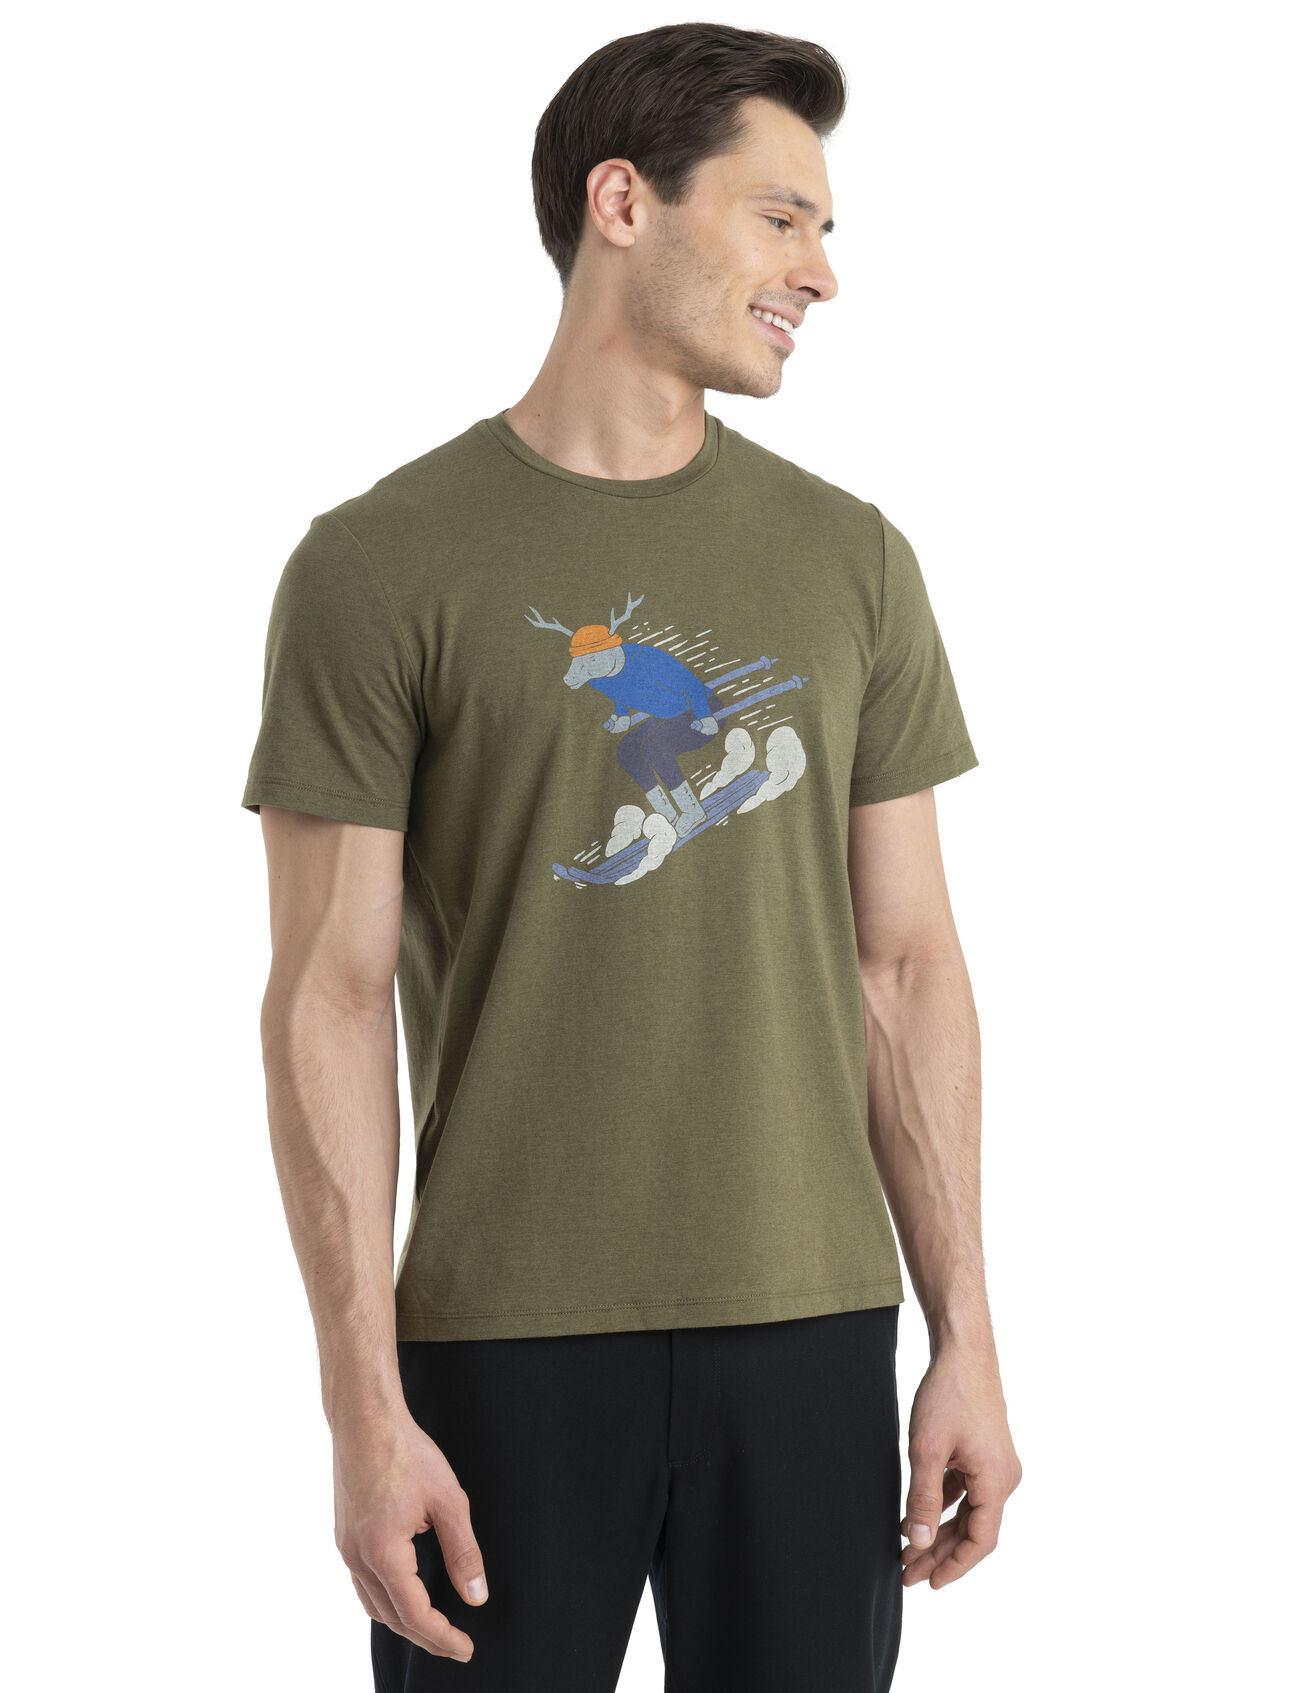 Mens Merino Central Classic Short Sleeve T-Shirt Ski Rider Central to your wardrobe and as classic as they come, the Central Classic Short Sleeve Tee Ski Rider is a go-to tee featuring a soft jersey blend of merino wool and organic cotton. The original artwork features a whimsical drawing of a deer on skis.